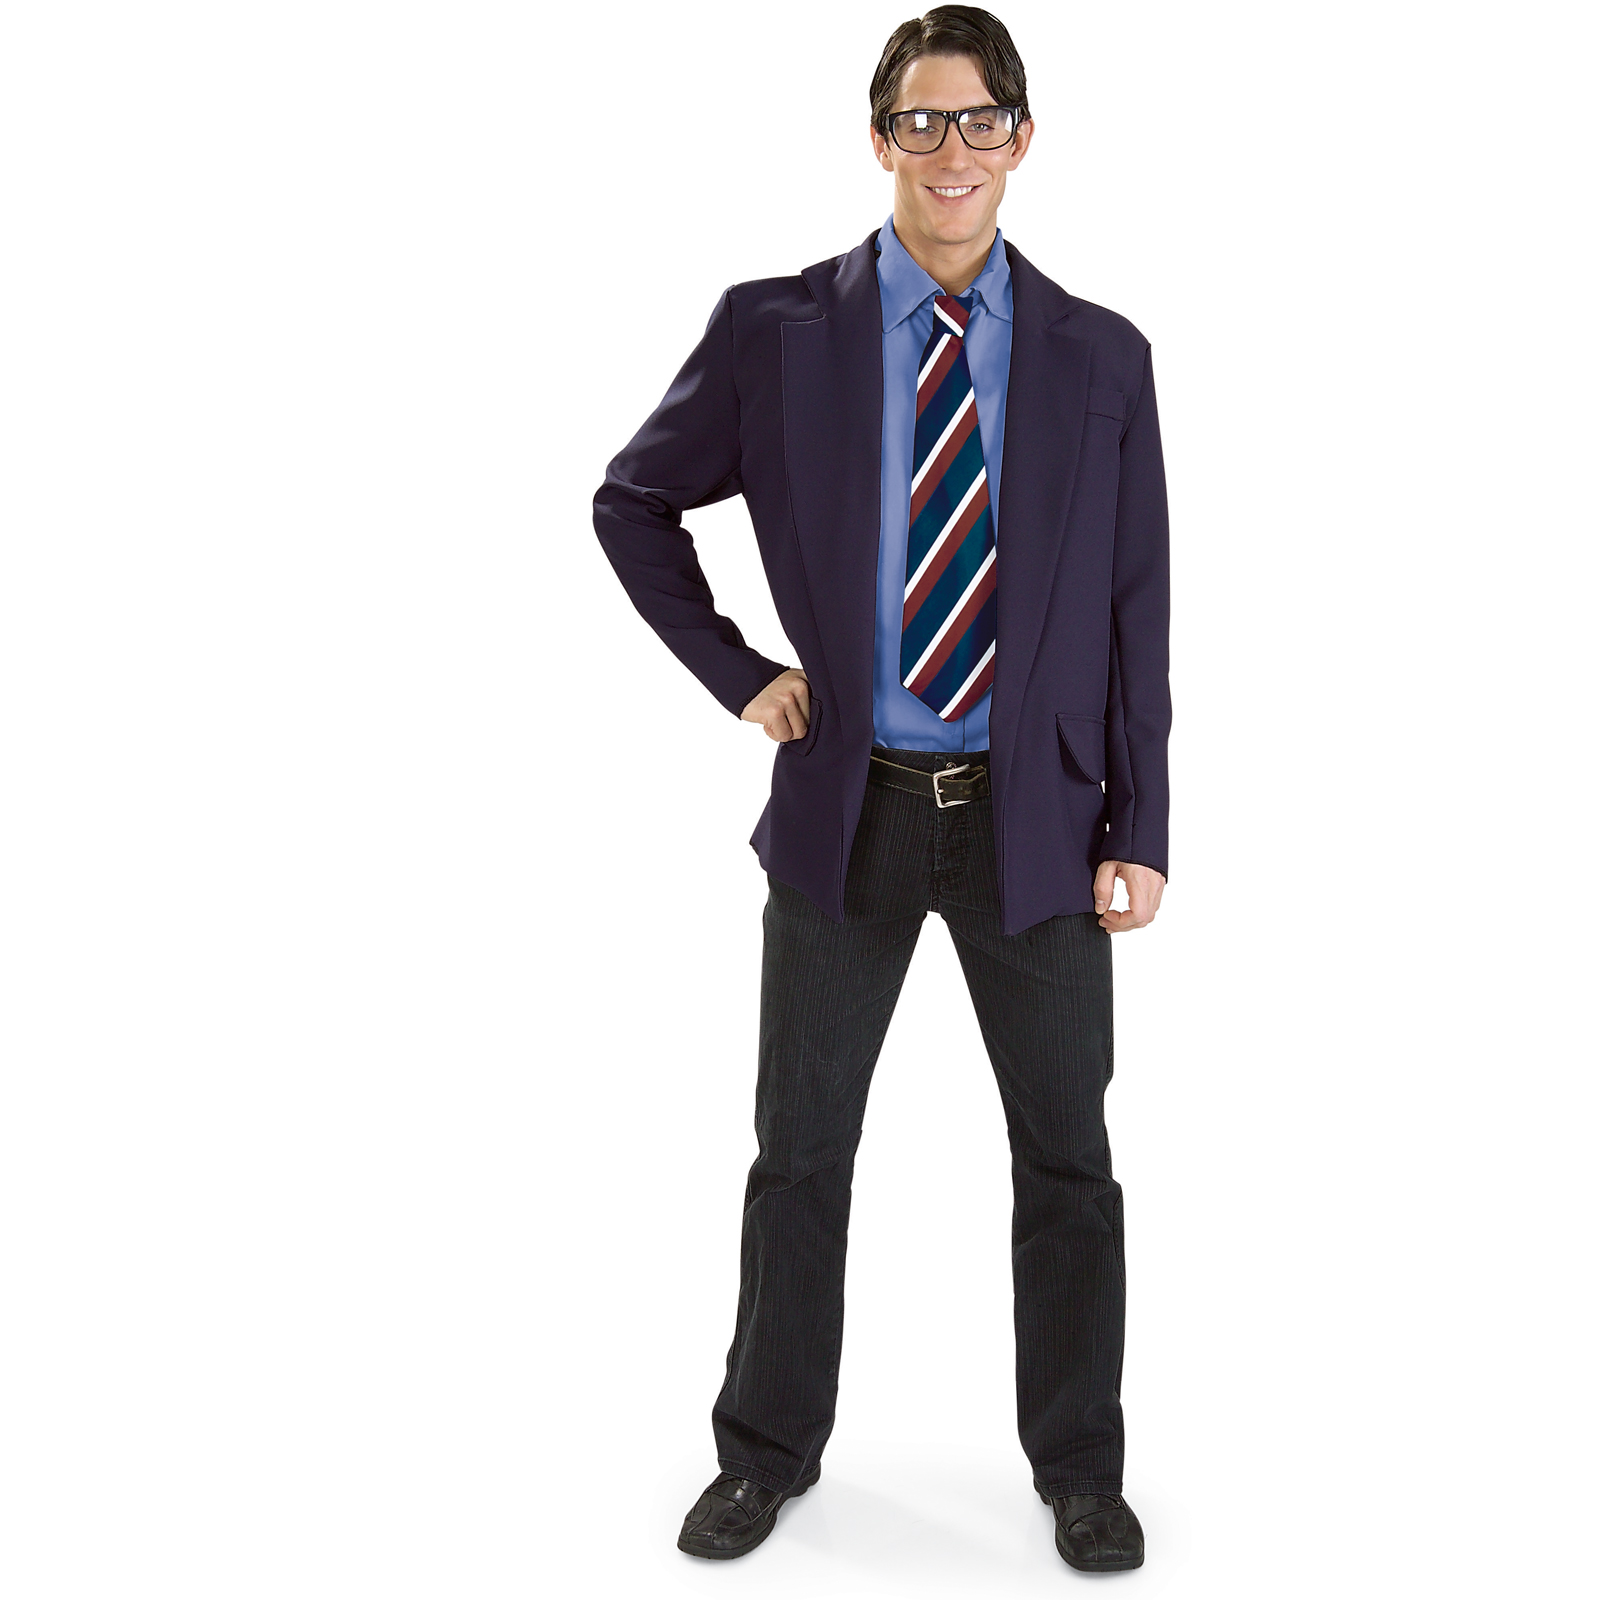 Rubie's Costume Co Men's Reversible Clark Kent/Superman Adult - Blue - Standard One-Size for Valentines Day